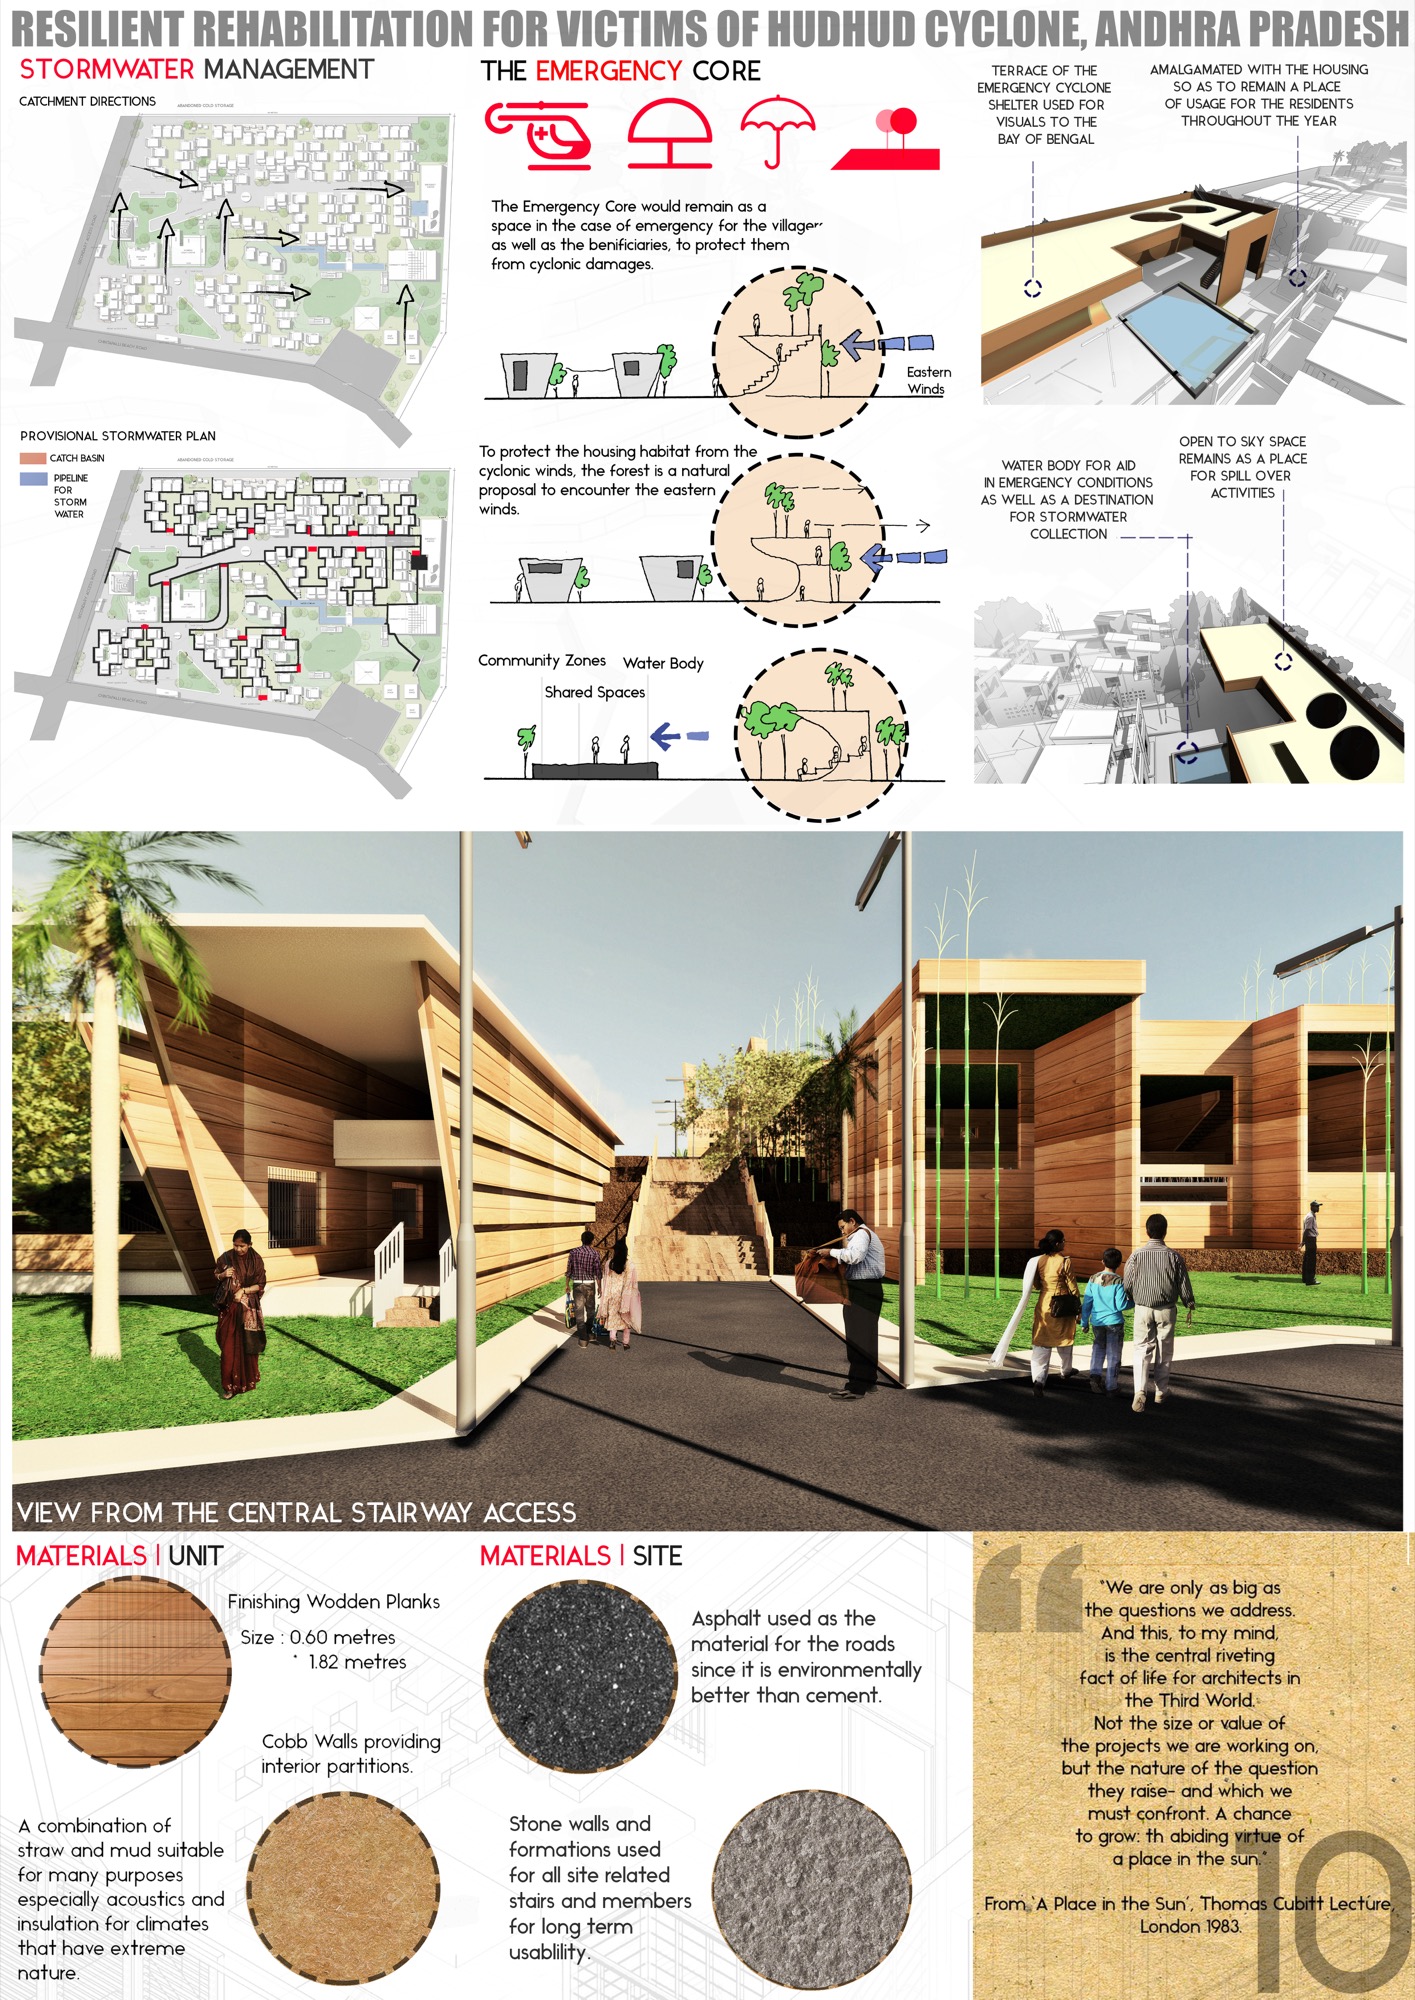 B.Arch Thesis: RESILIENT REHABILITATION FOR VICTIMS OF HUDHUD CYCLONE, ANDHRA PRADESH, by Sanand Telang 21